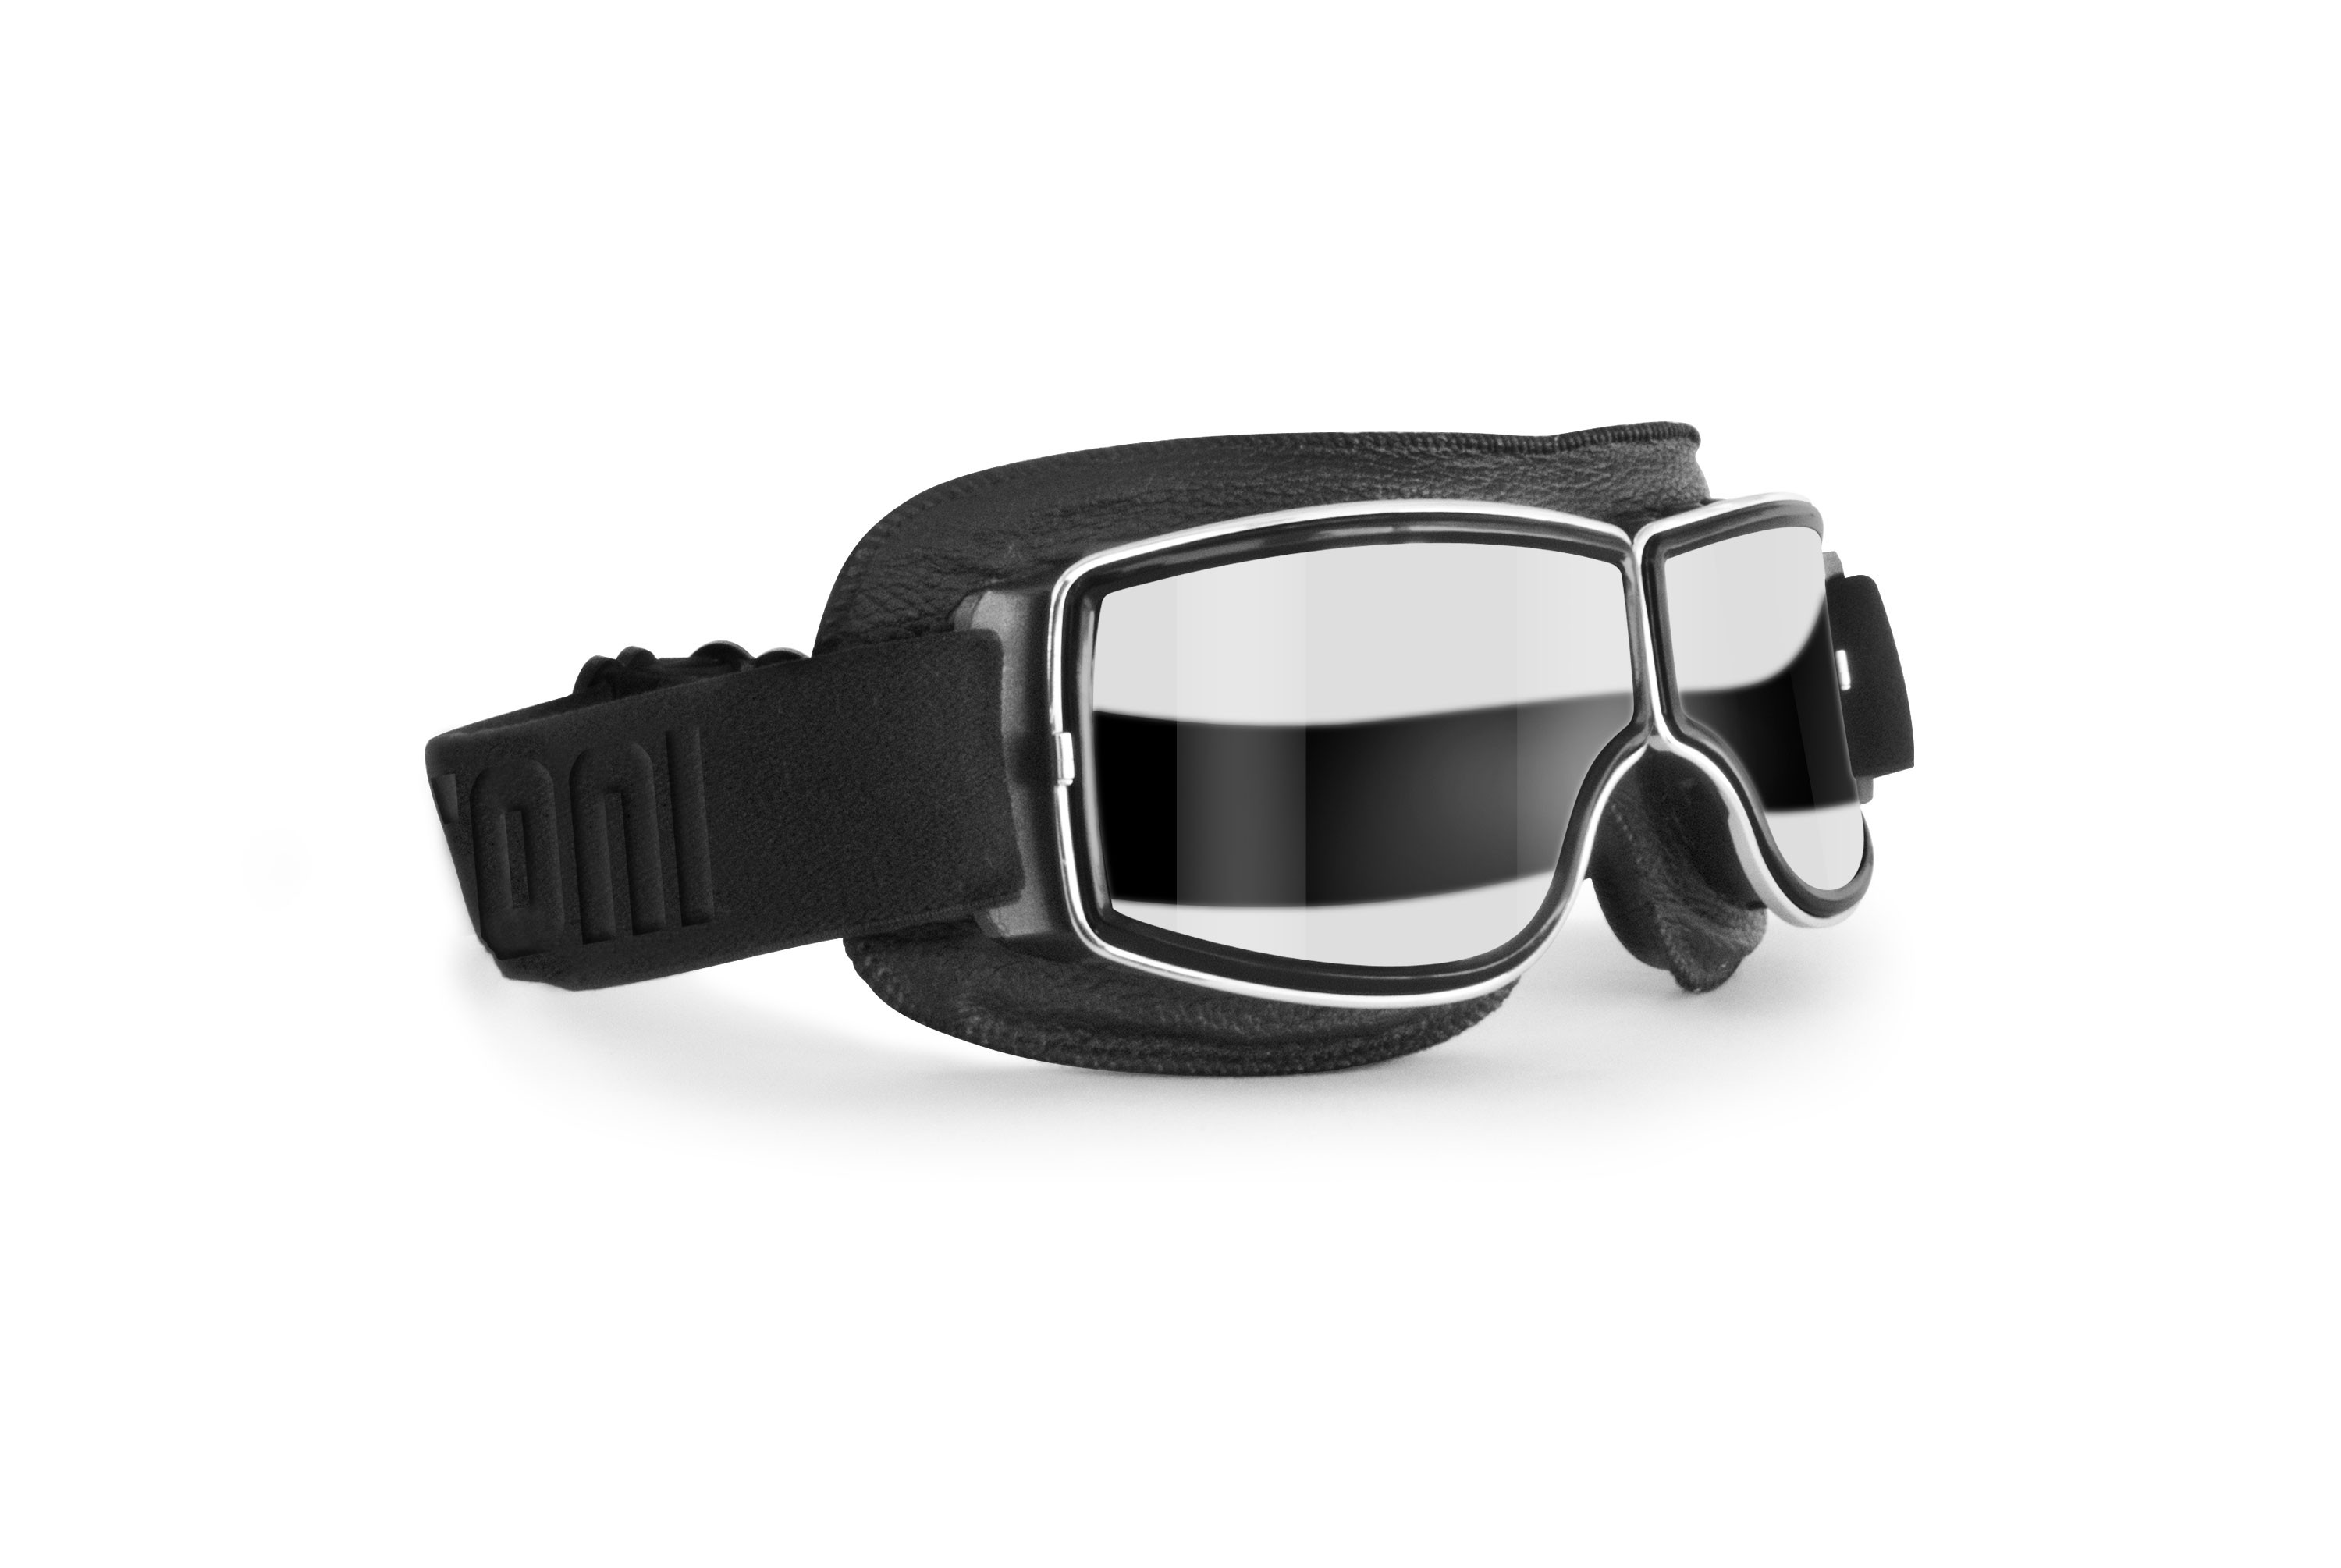 Black leather goggles with chrome metal frame - Compact design great for wearing with helmets | Bertoni Italy